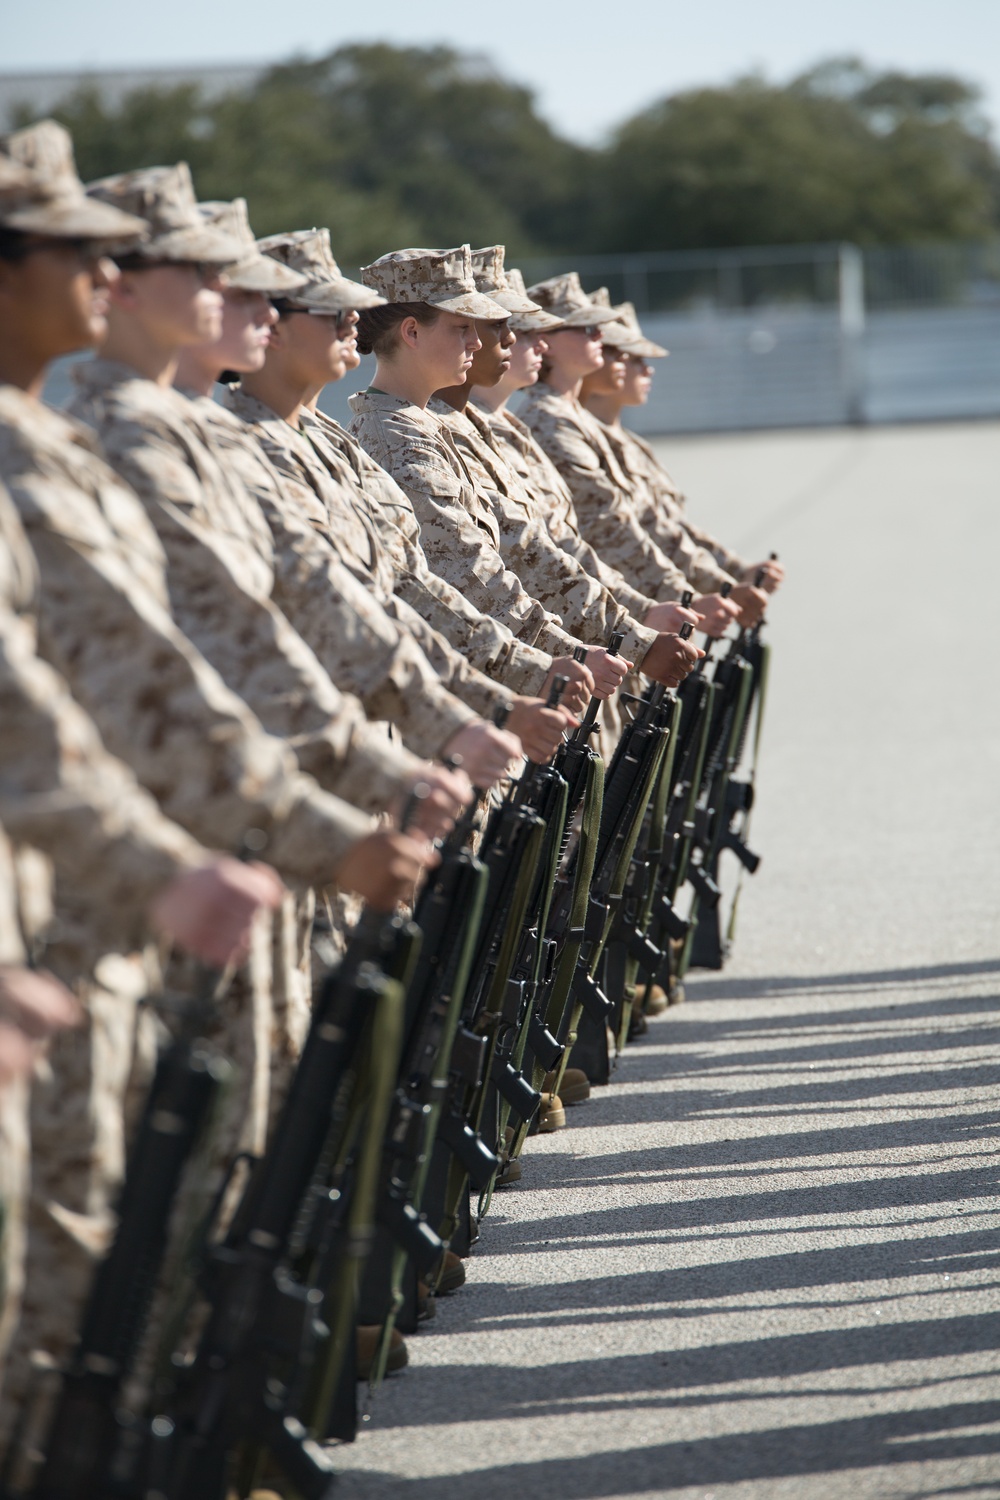 DVIDS Images Marine recruits march closer to graduation on Parris